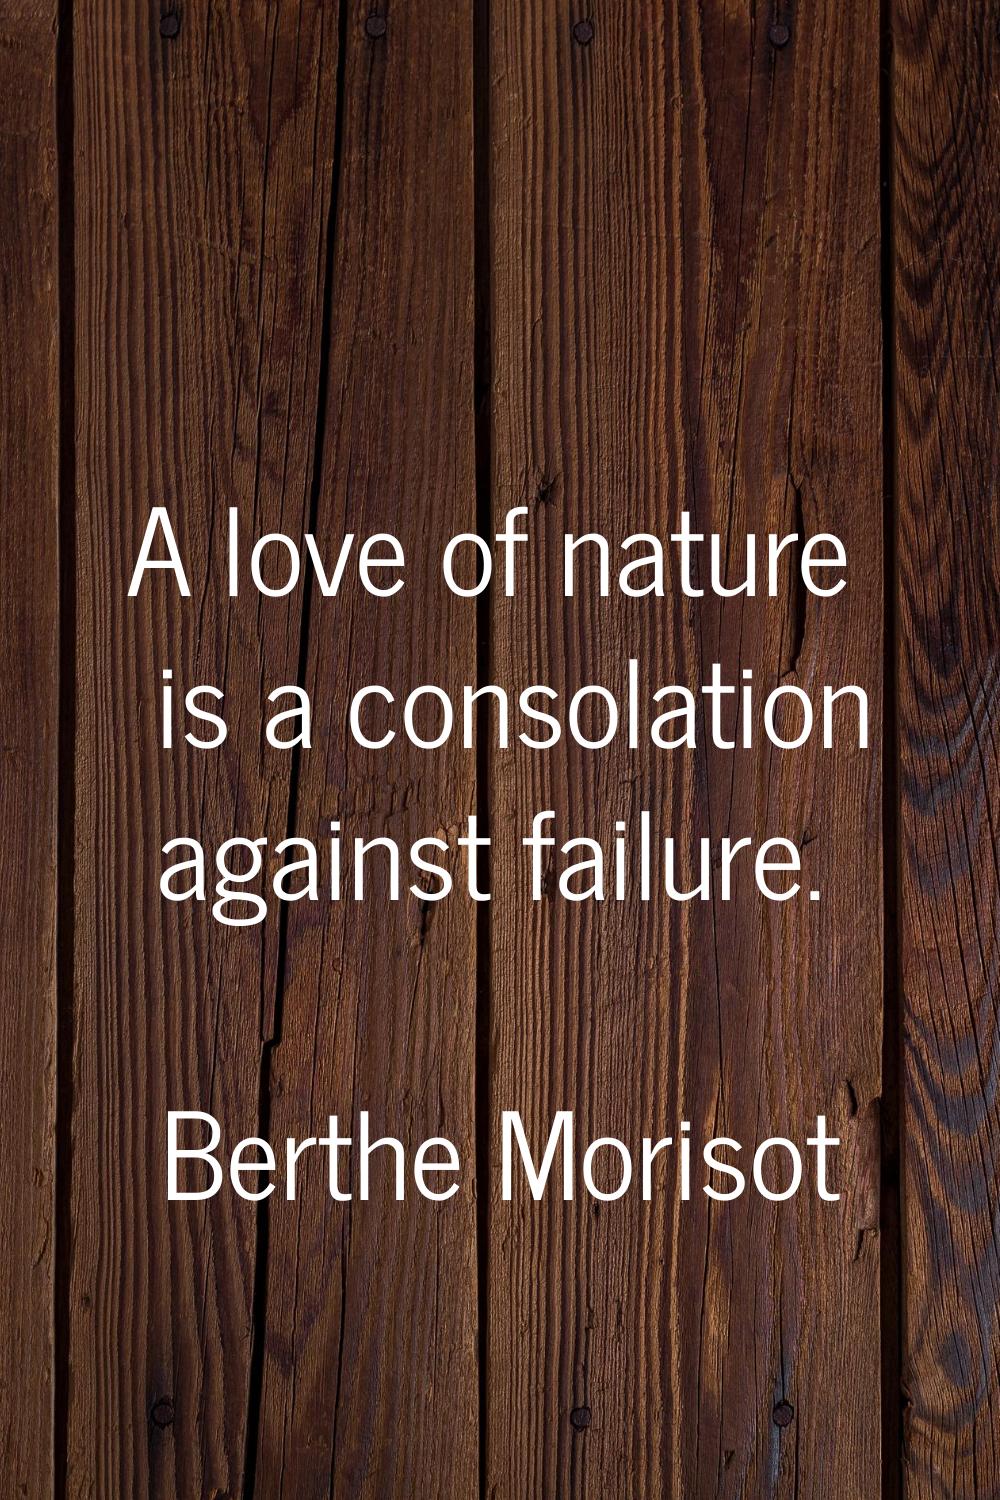 A love of nature is a consolation against failure.